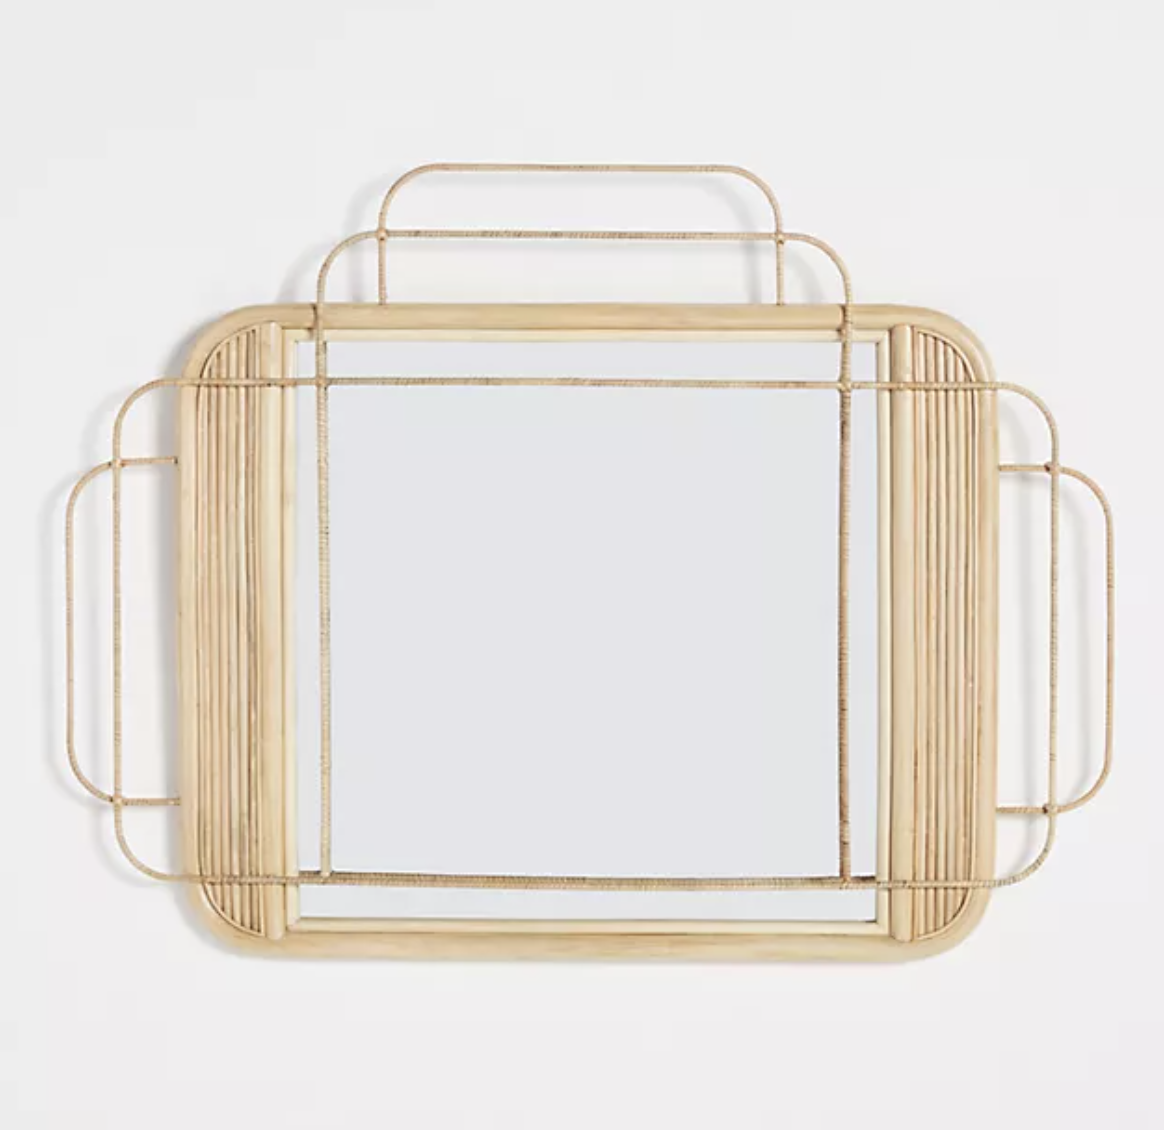 square-shaped rattan mirror with sculptured detailing around the rim